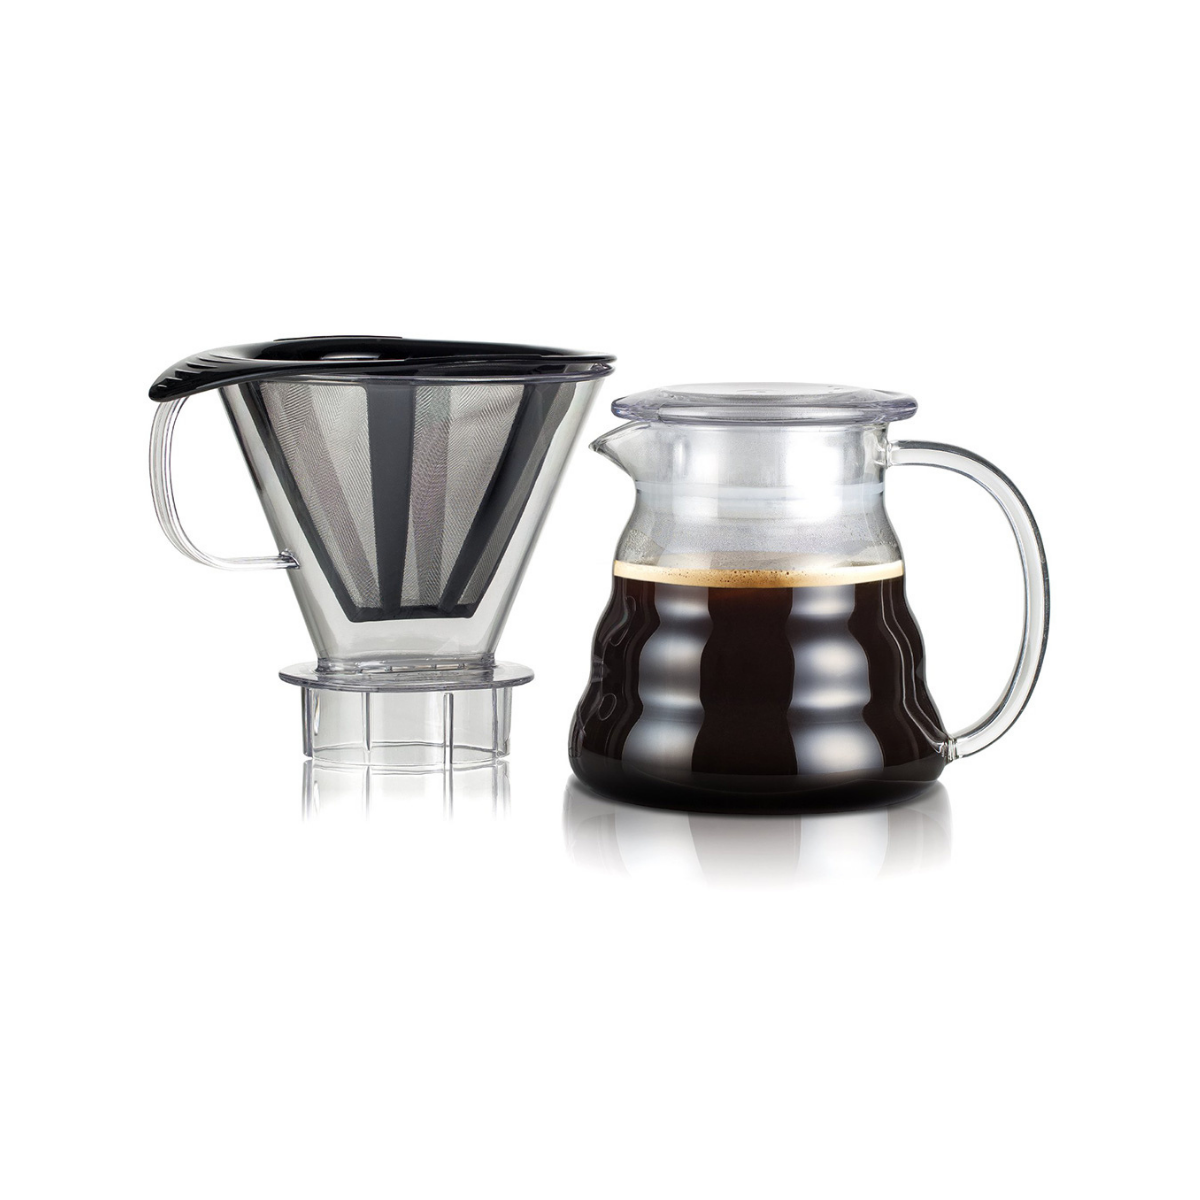 Bodum Filter Coffee Maker transparent with steel filter 3 cups - pour over 